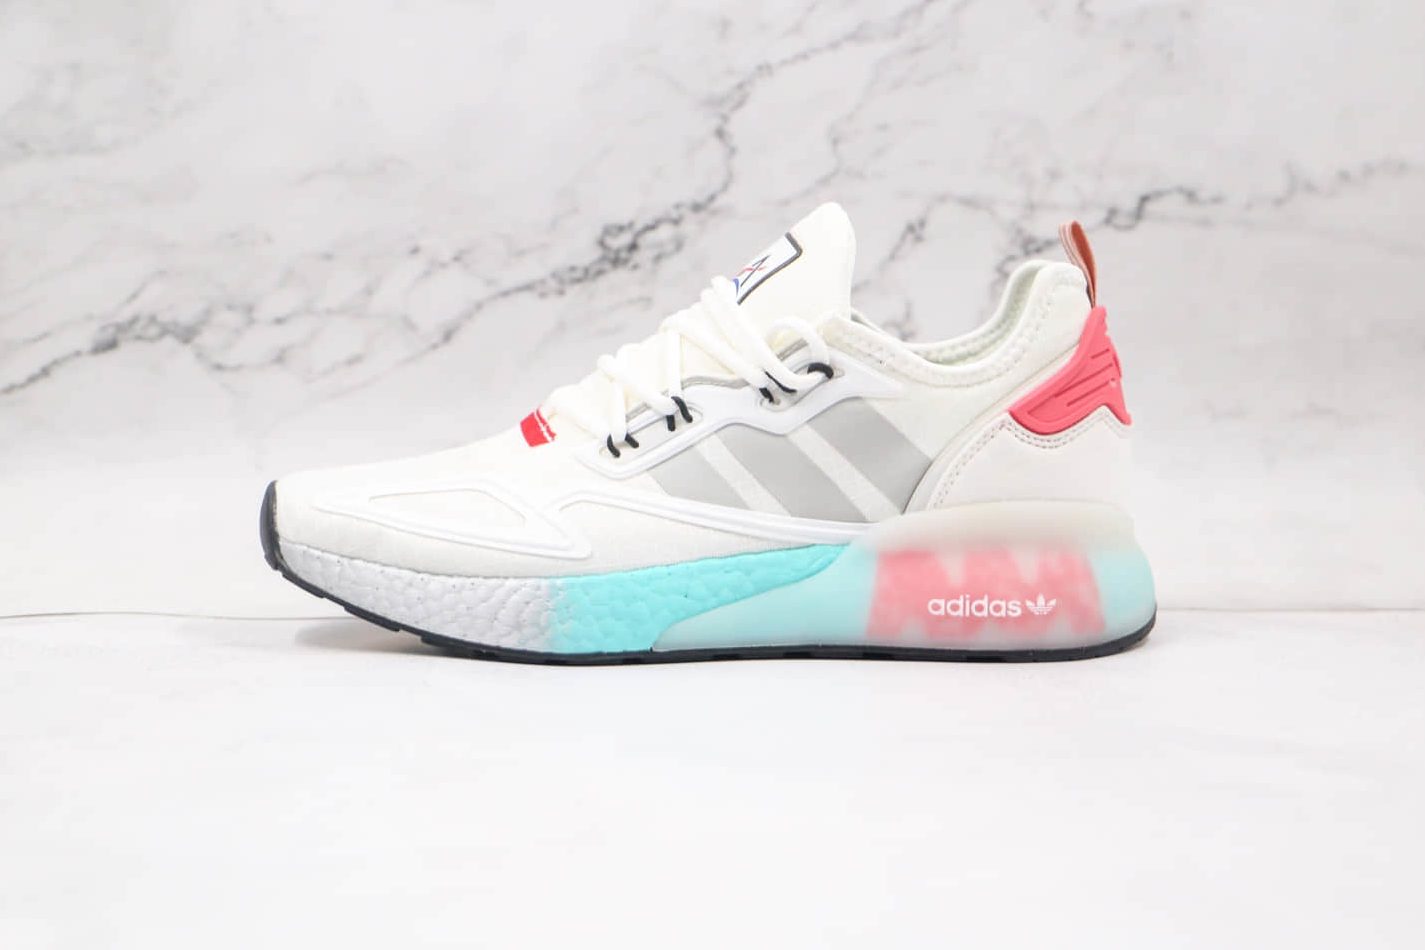 Adidas NASA x ZX 2K Boost 'White Hazy Rose' FX7054 - Sleek and Stylish Lunar-Inspired Sneakers